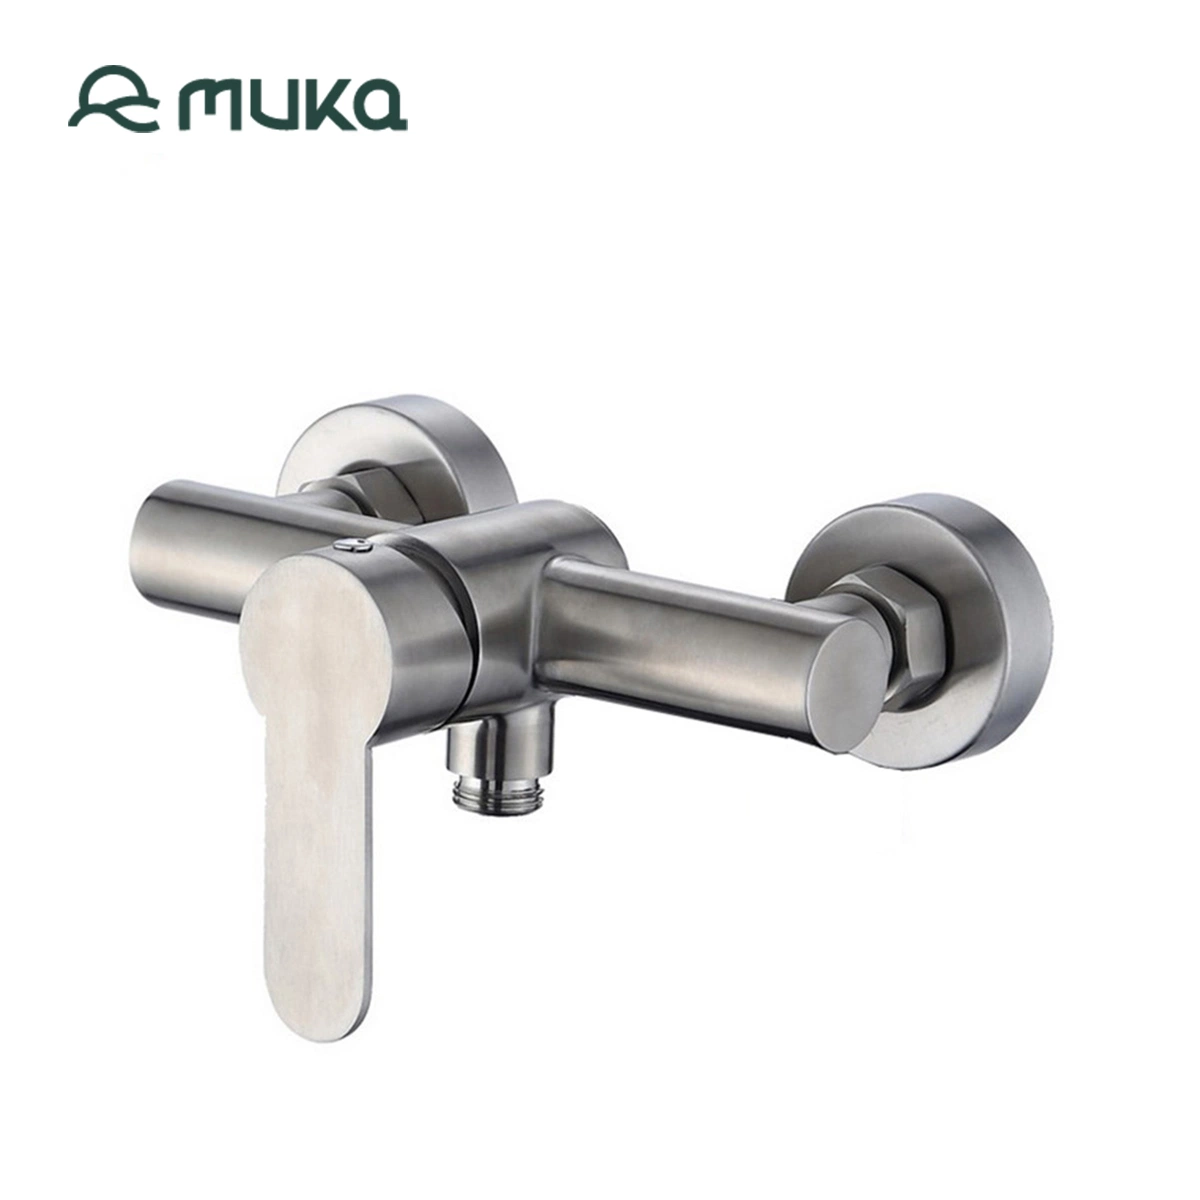 Wholesale Bathroom Accessories Multifunctional Stainless Steel Single Lever Brass Shower Mixer Concealed Bath Faucet